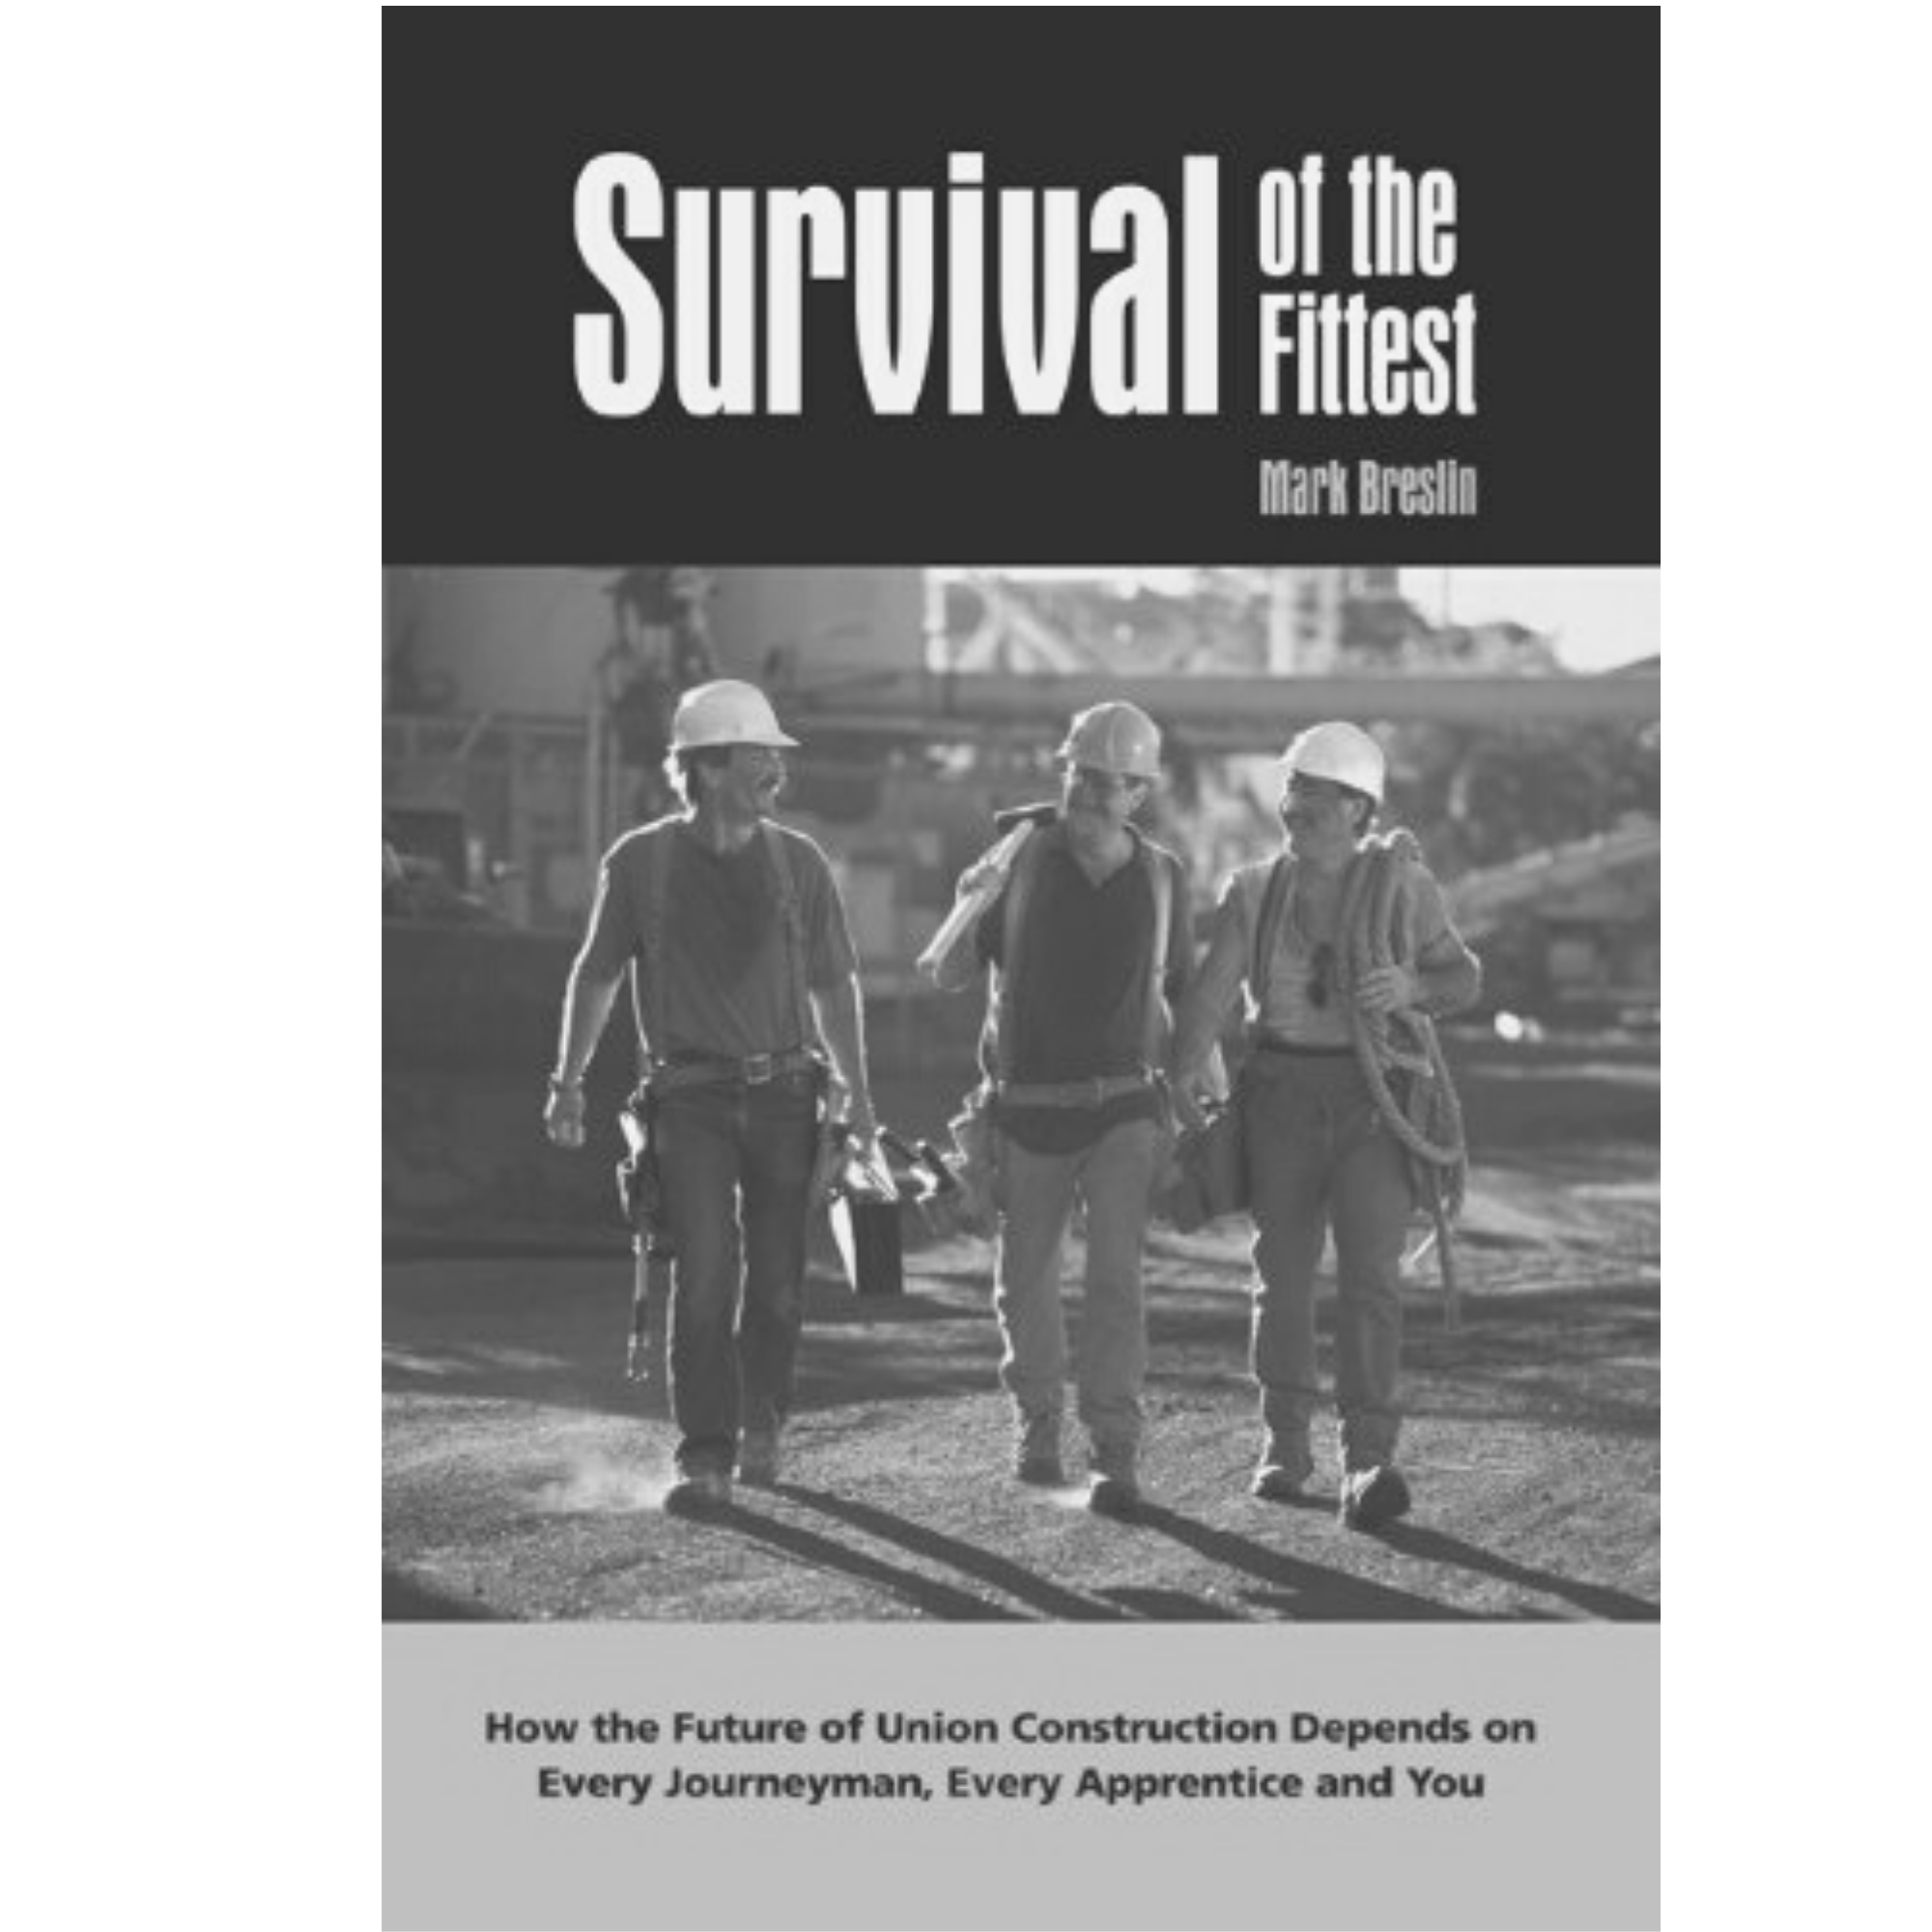 Survival of the Fittest by Mark Breslin